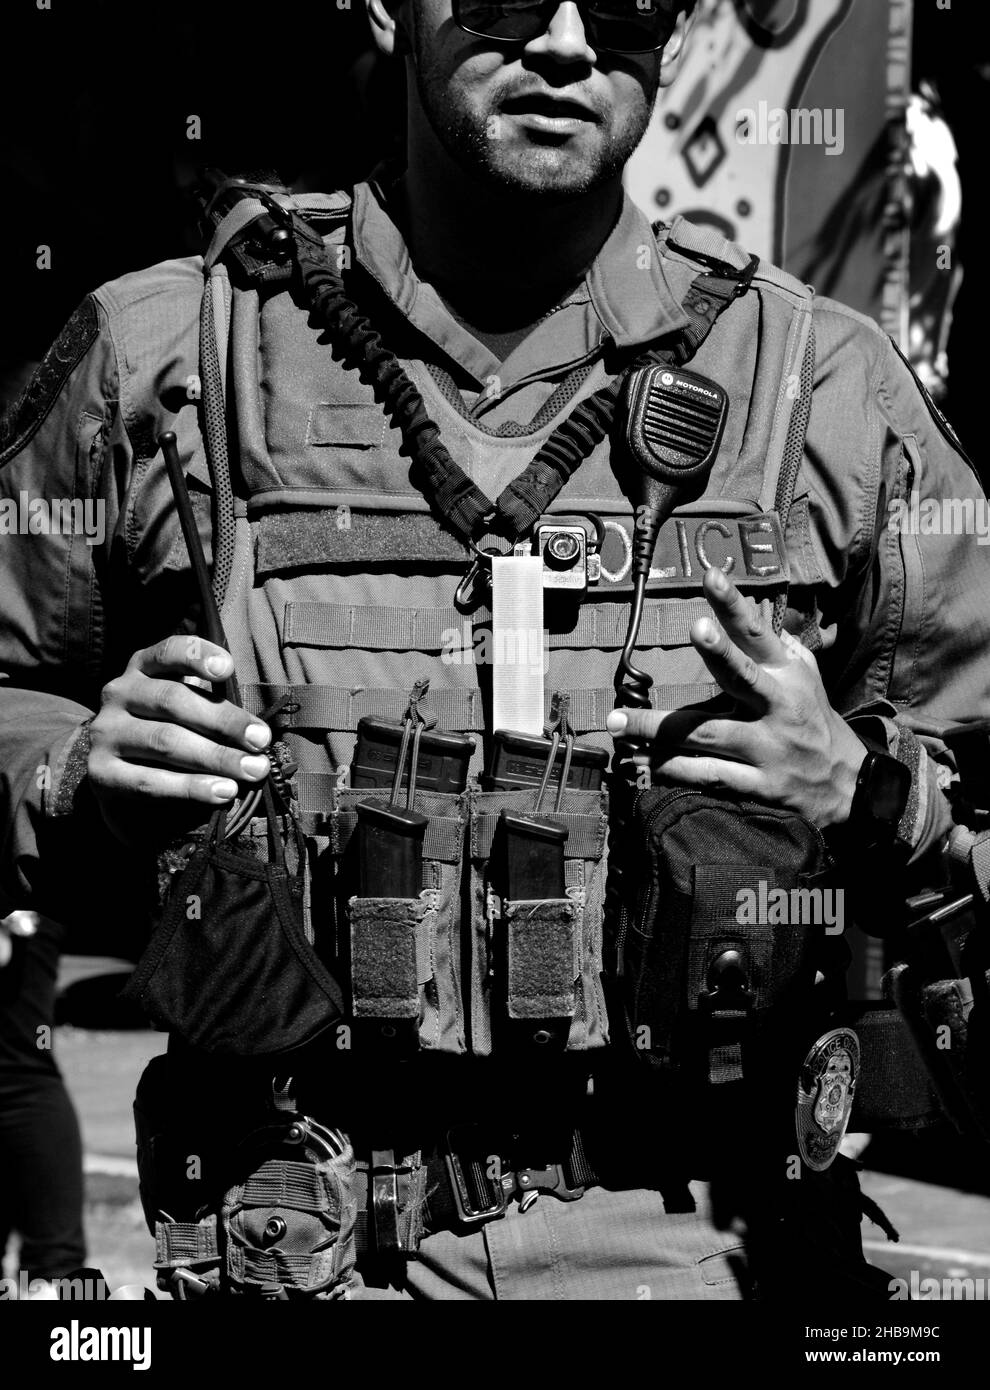 A member of the Santa Fe, New Mexico, SWAT team keeps on eye on the crowd enjoying an outdoor public event. Stock Photo